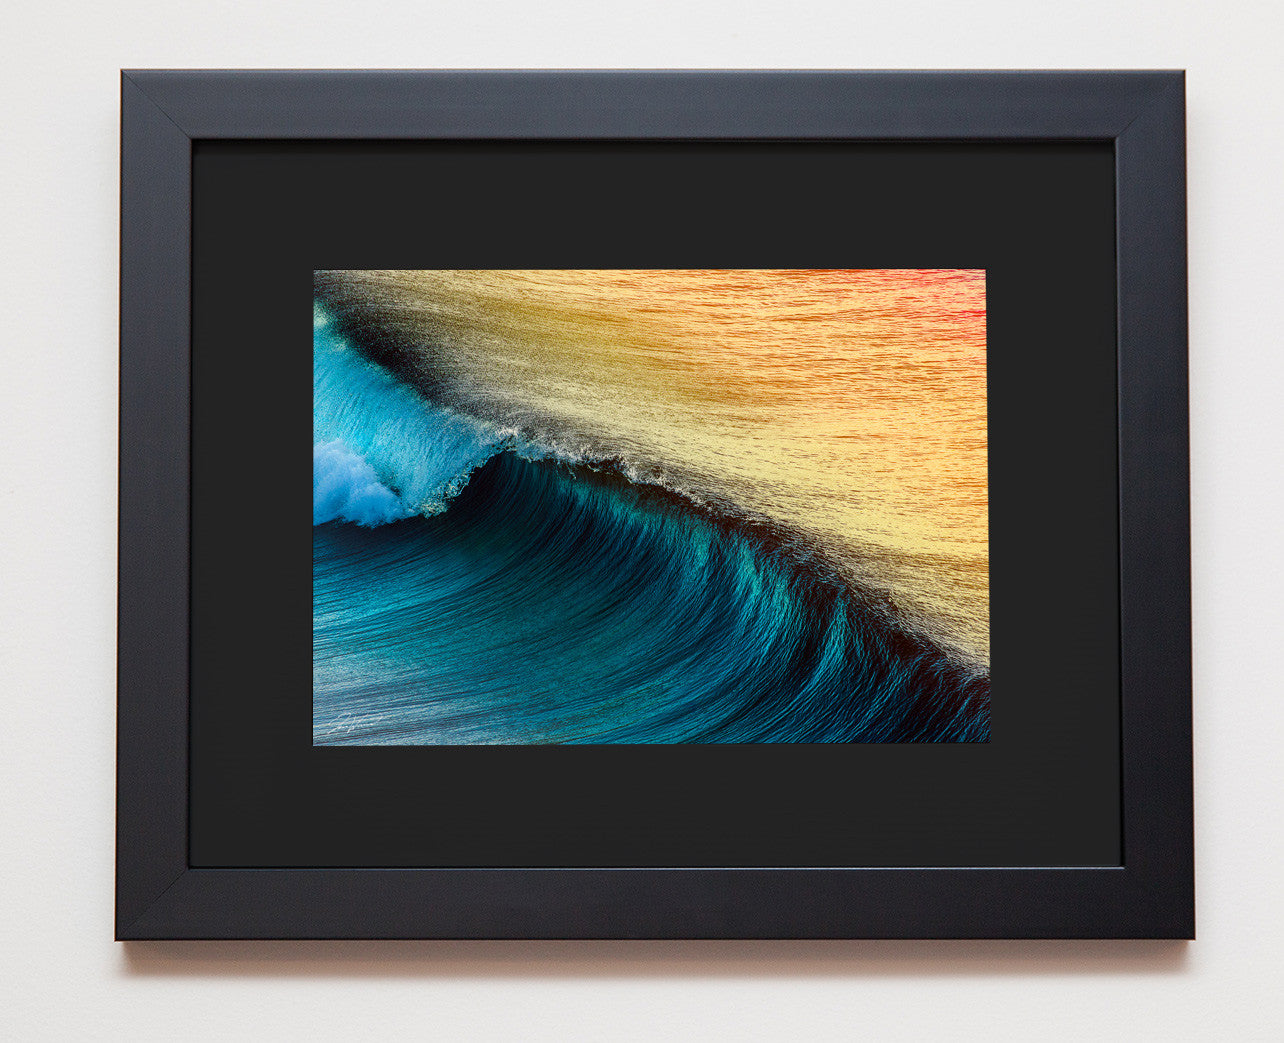 Classic black frame with black mat board